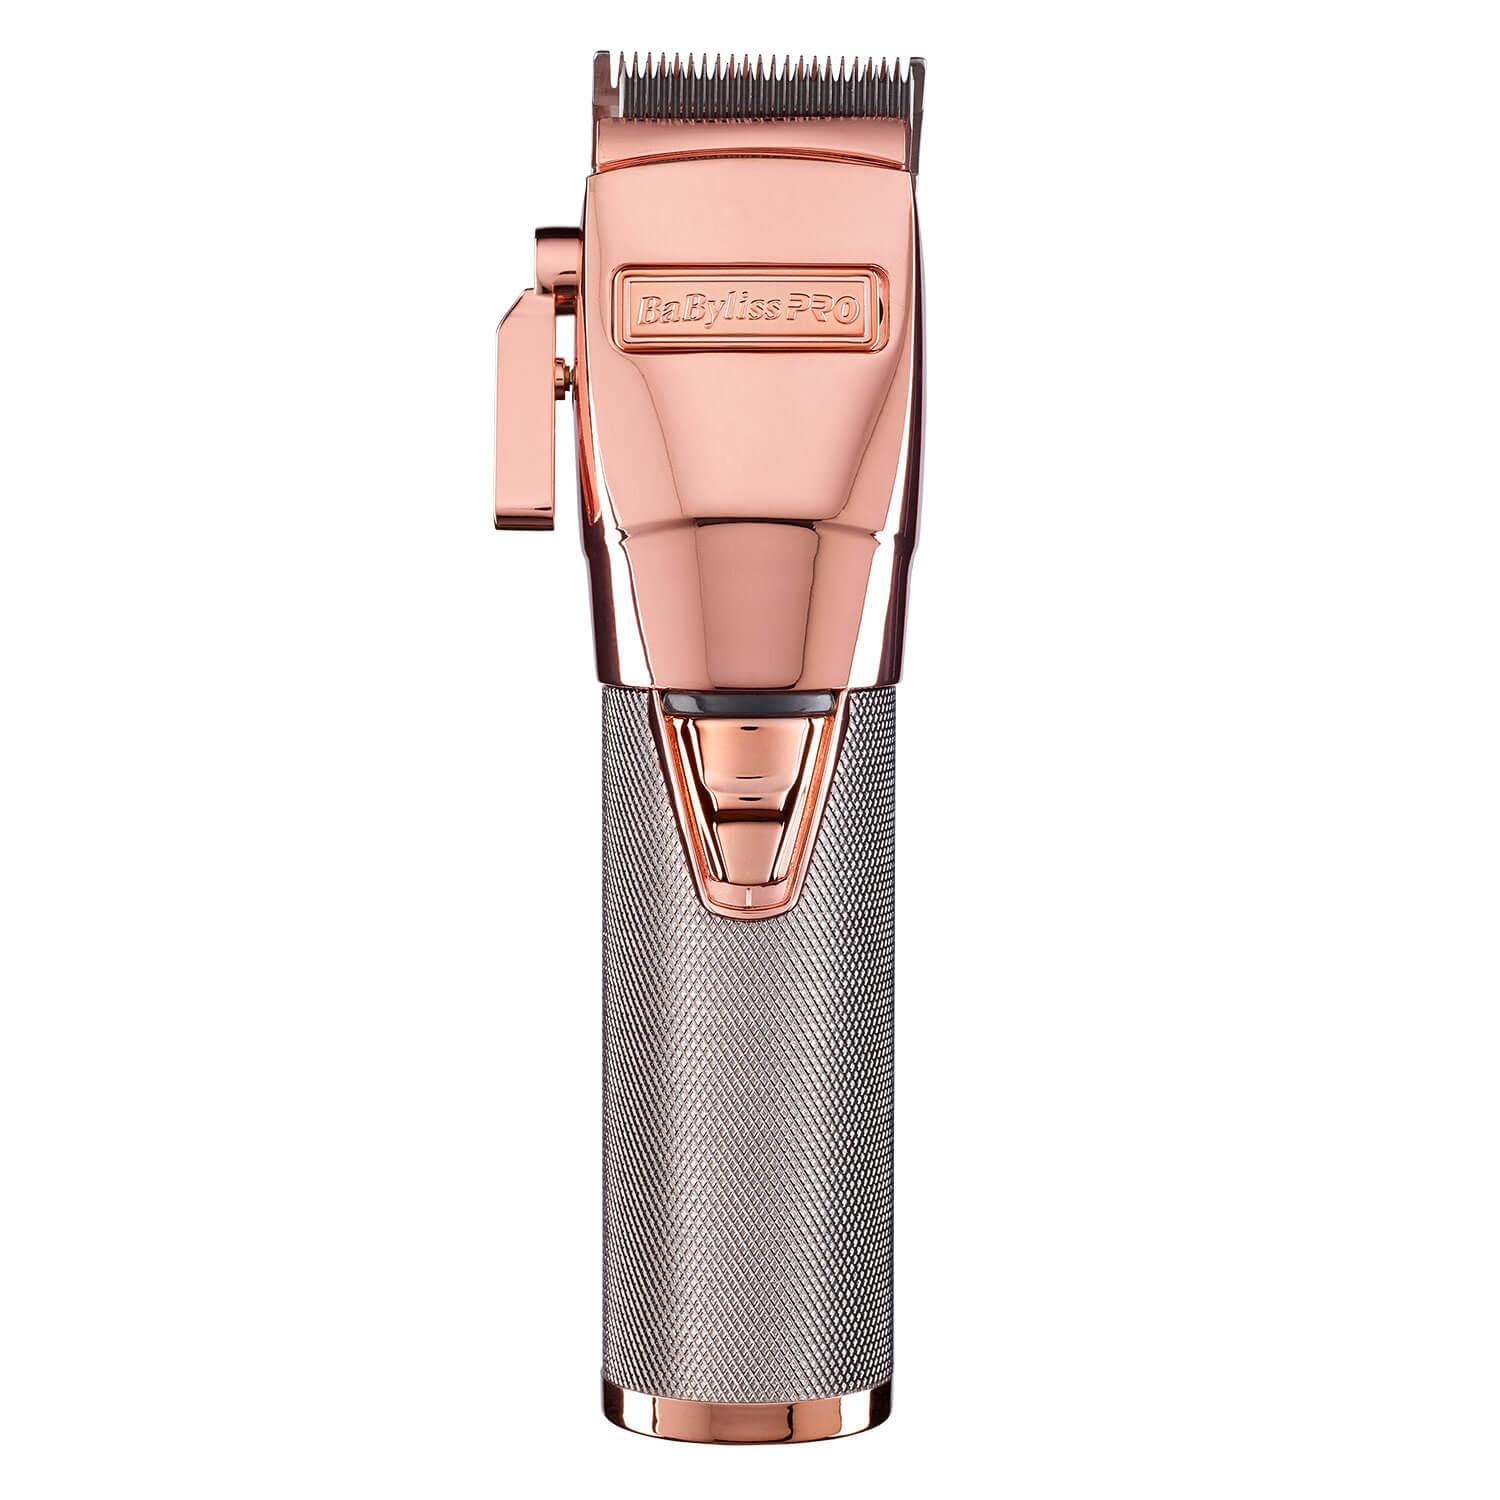 BaByliss Pro - RoseFX Professional Clipper rose/gold FX8700RGE